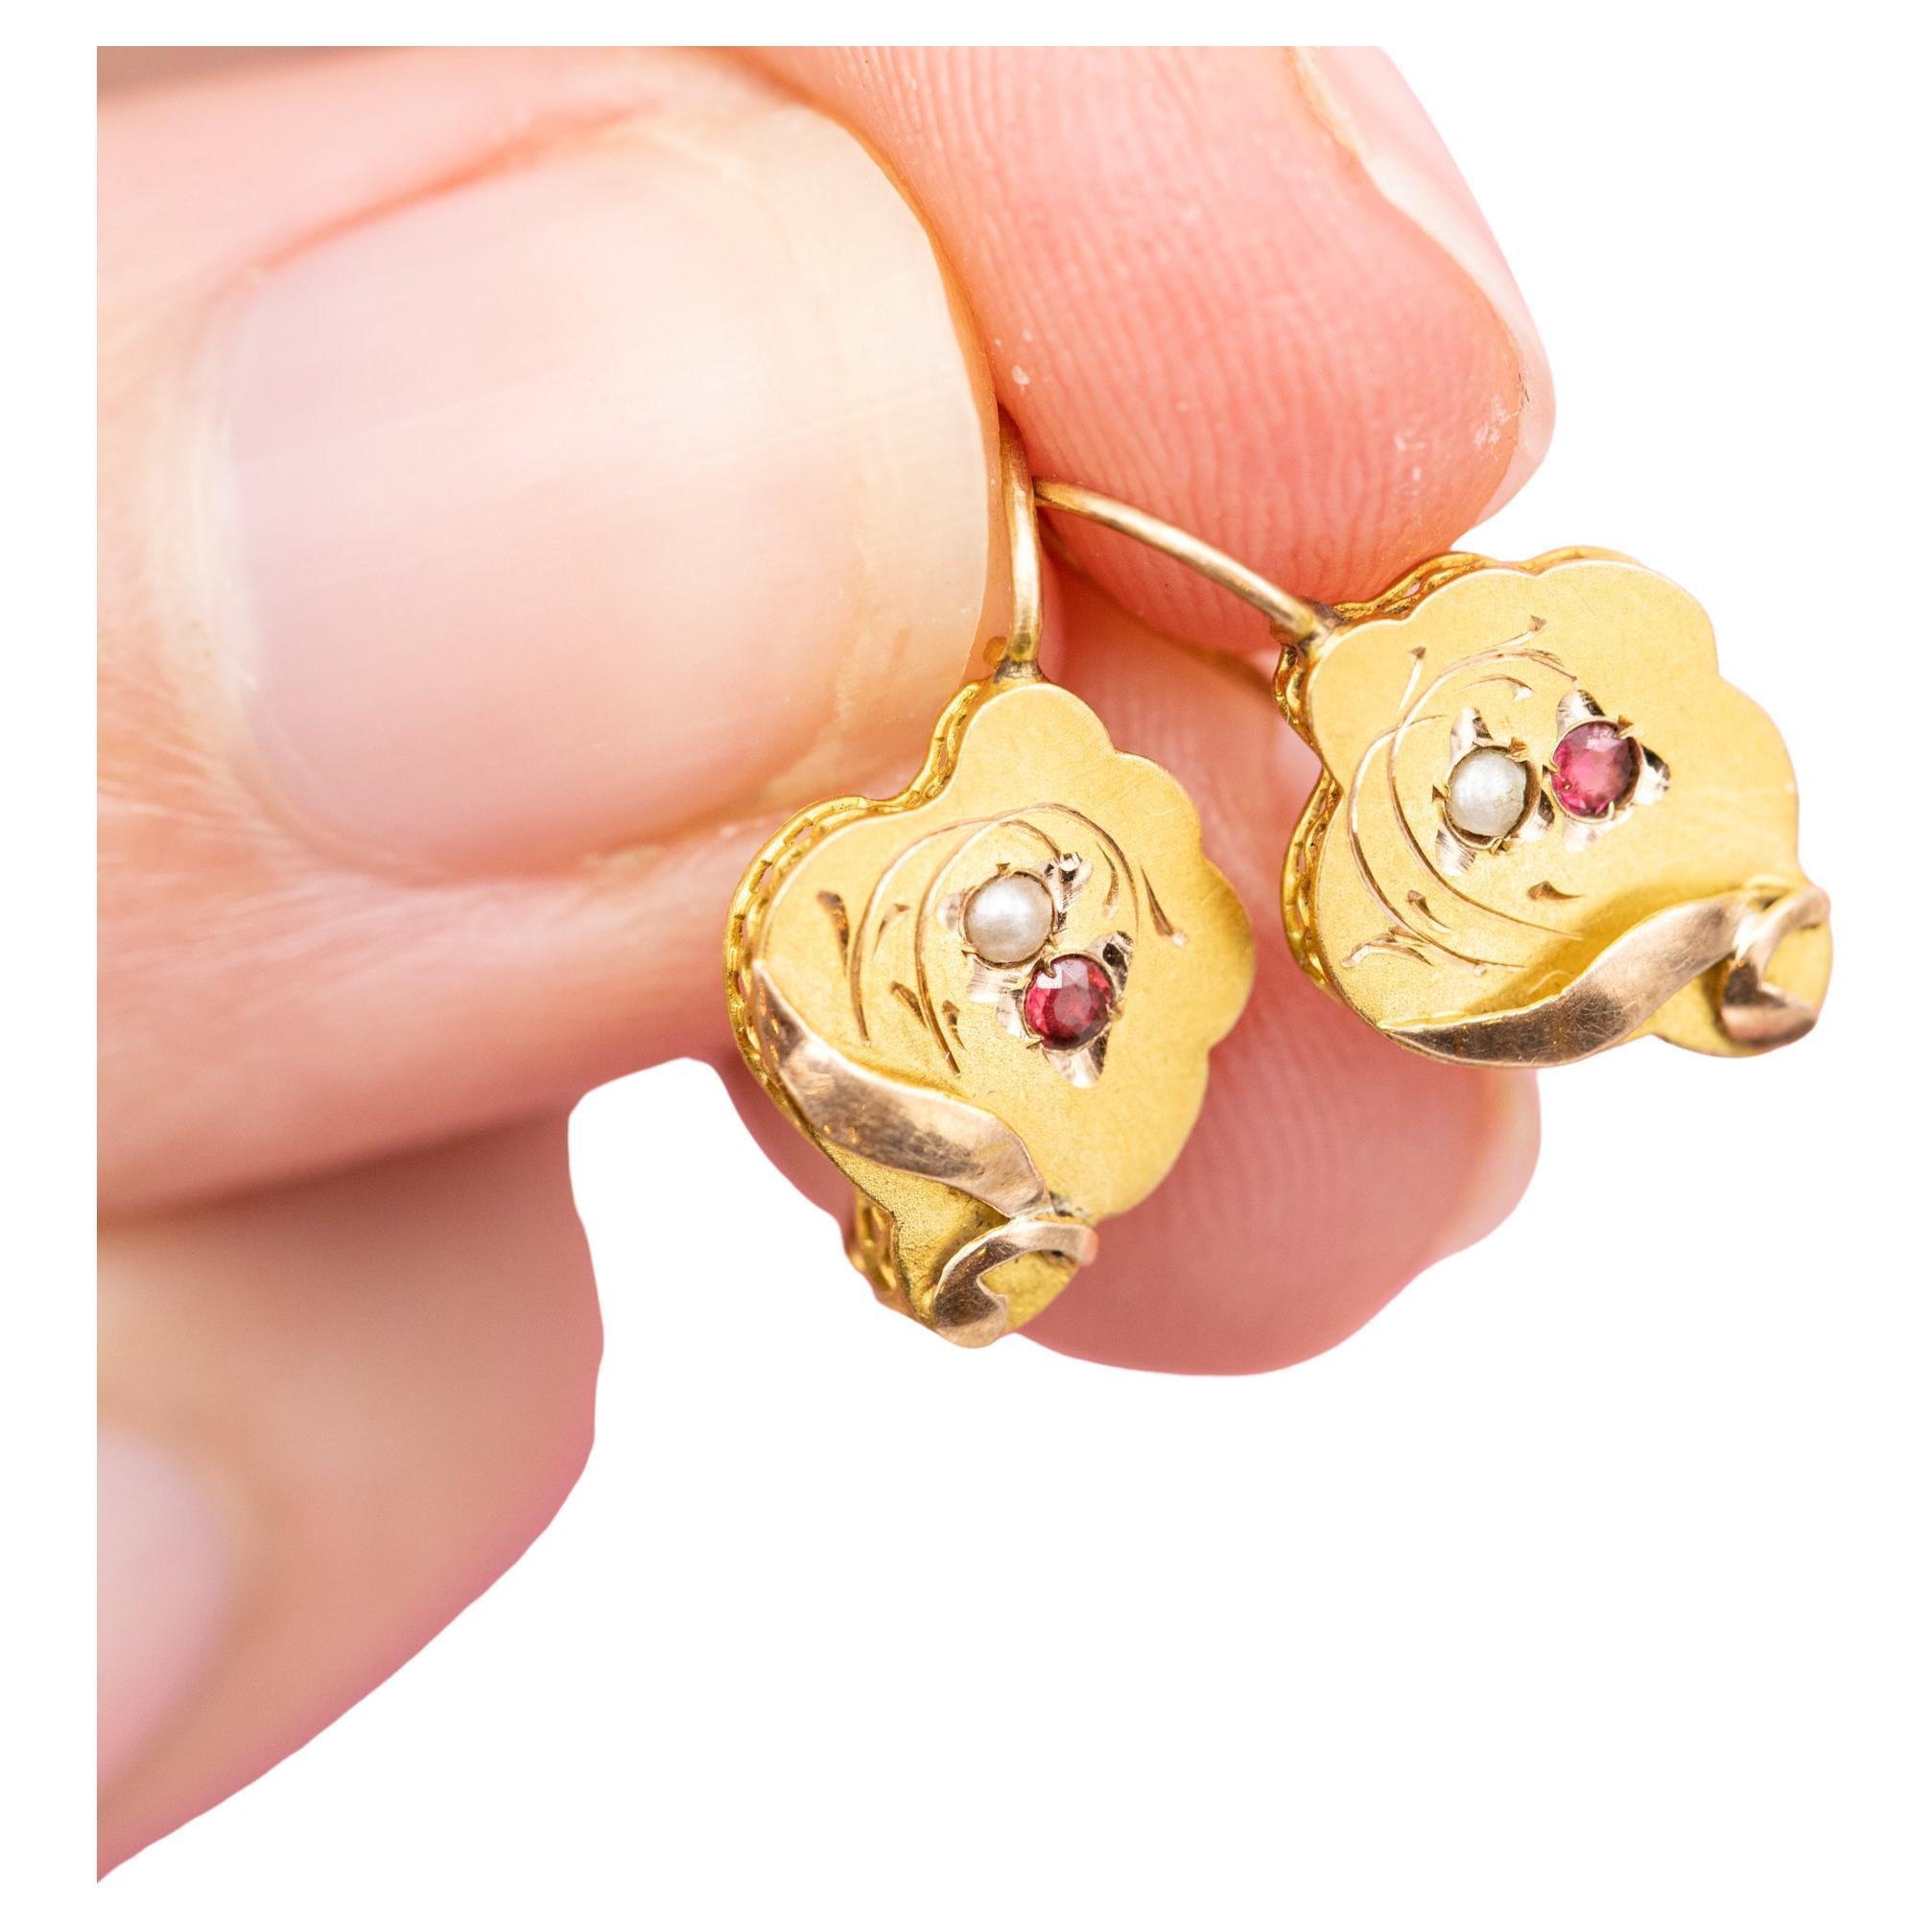 For sale are these romantic Victorian earrings. These 18 ct yellow gold dormeuse earrings (also called sleepers) are decorated with flower shaped ornaments, little seed pearls, rubies and are finished with a lot of detail. The fine details are well